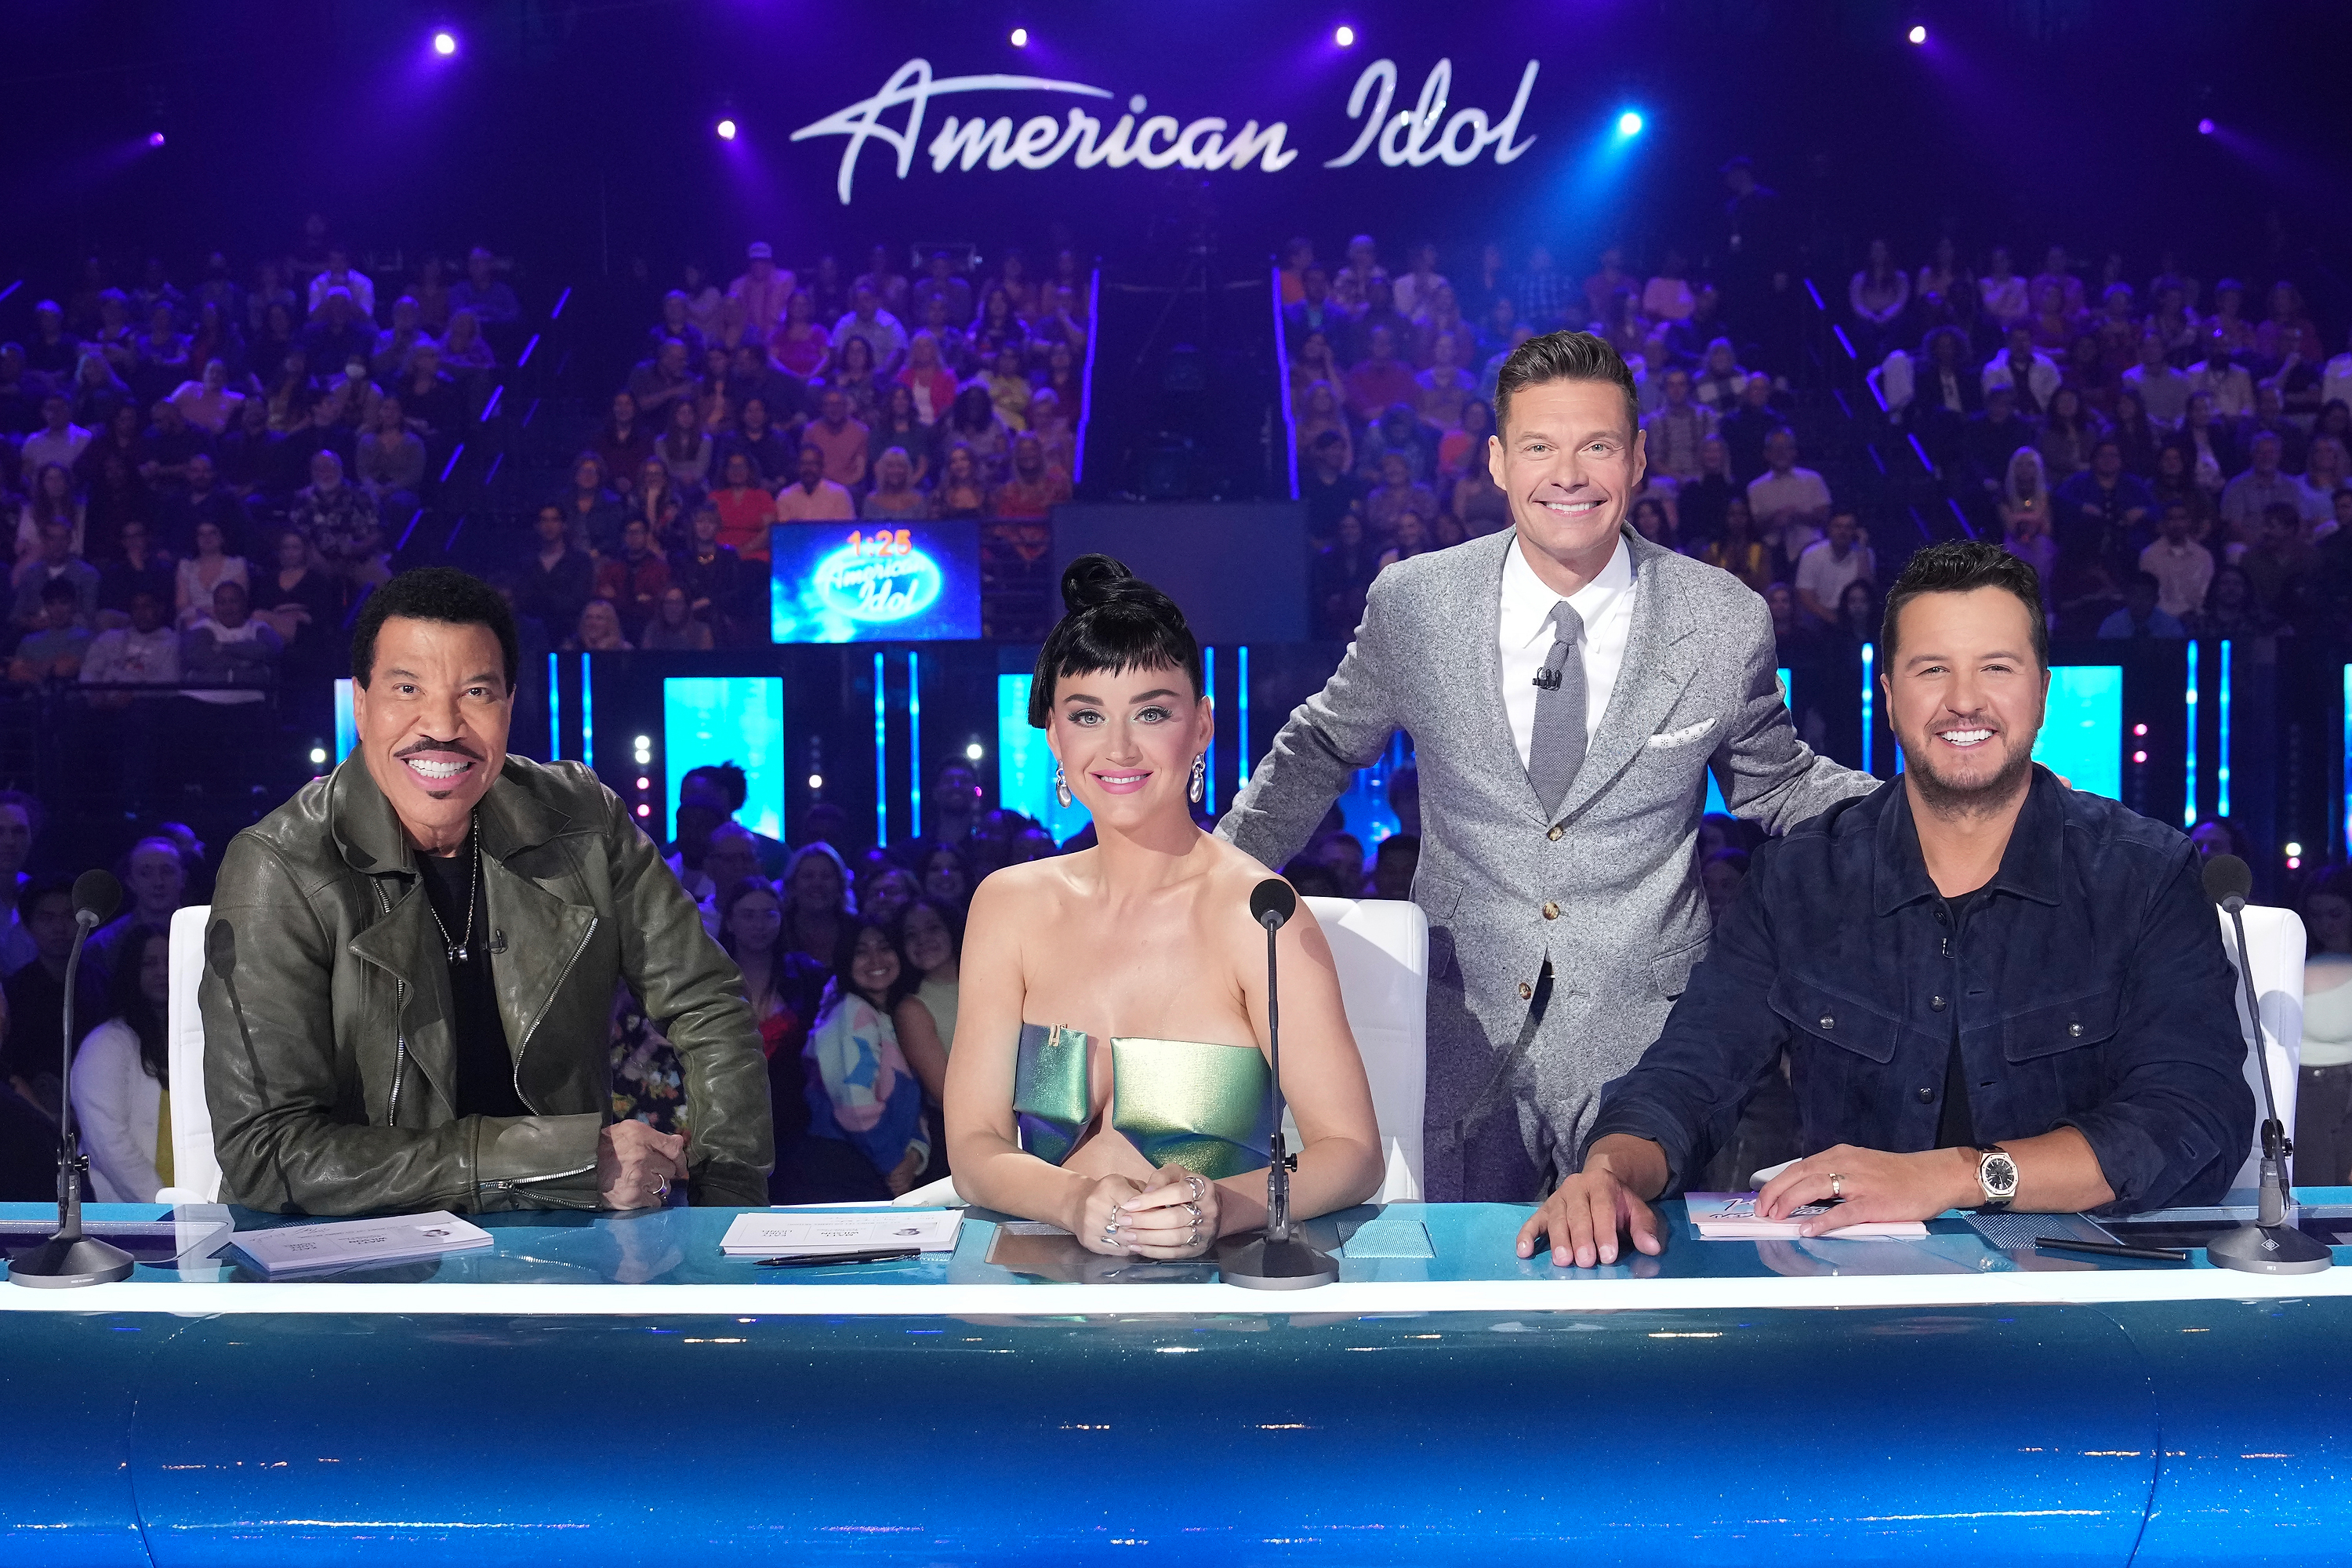 Fans have varying theories about who will fill Katy's judges' seat on American Idol